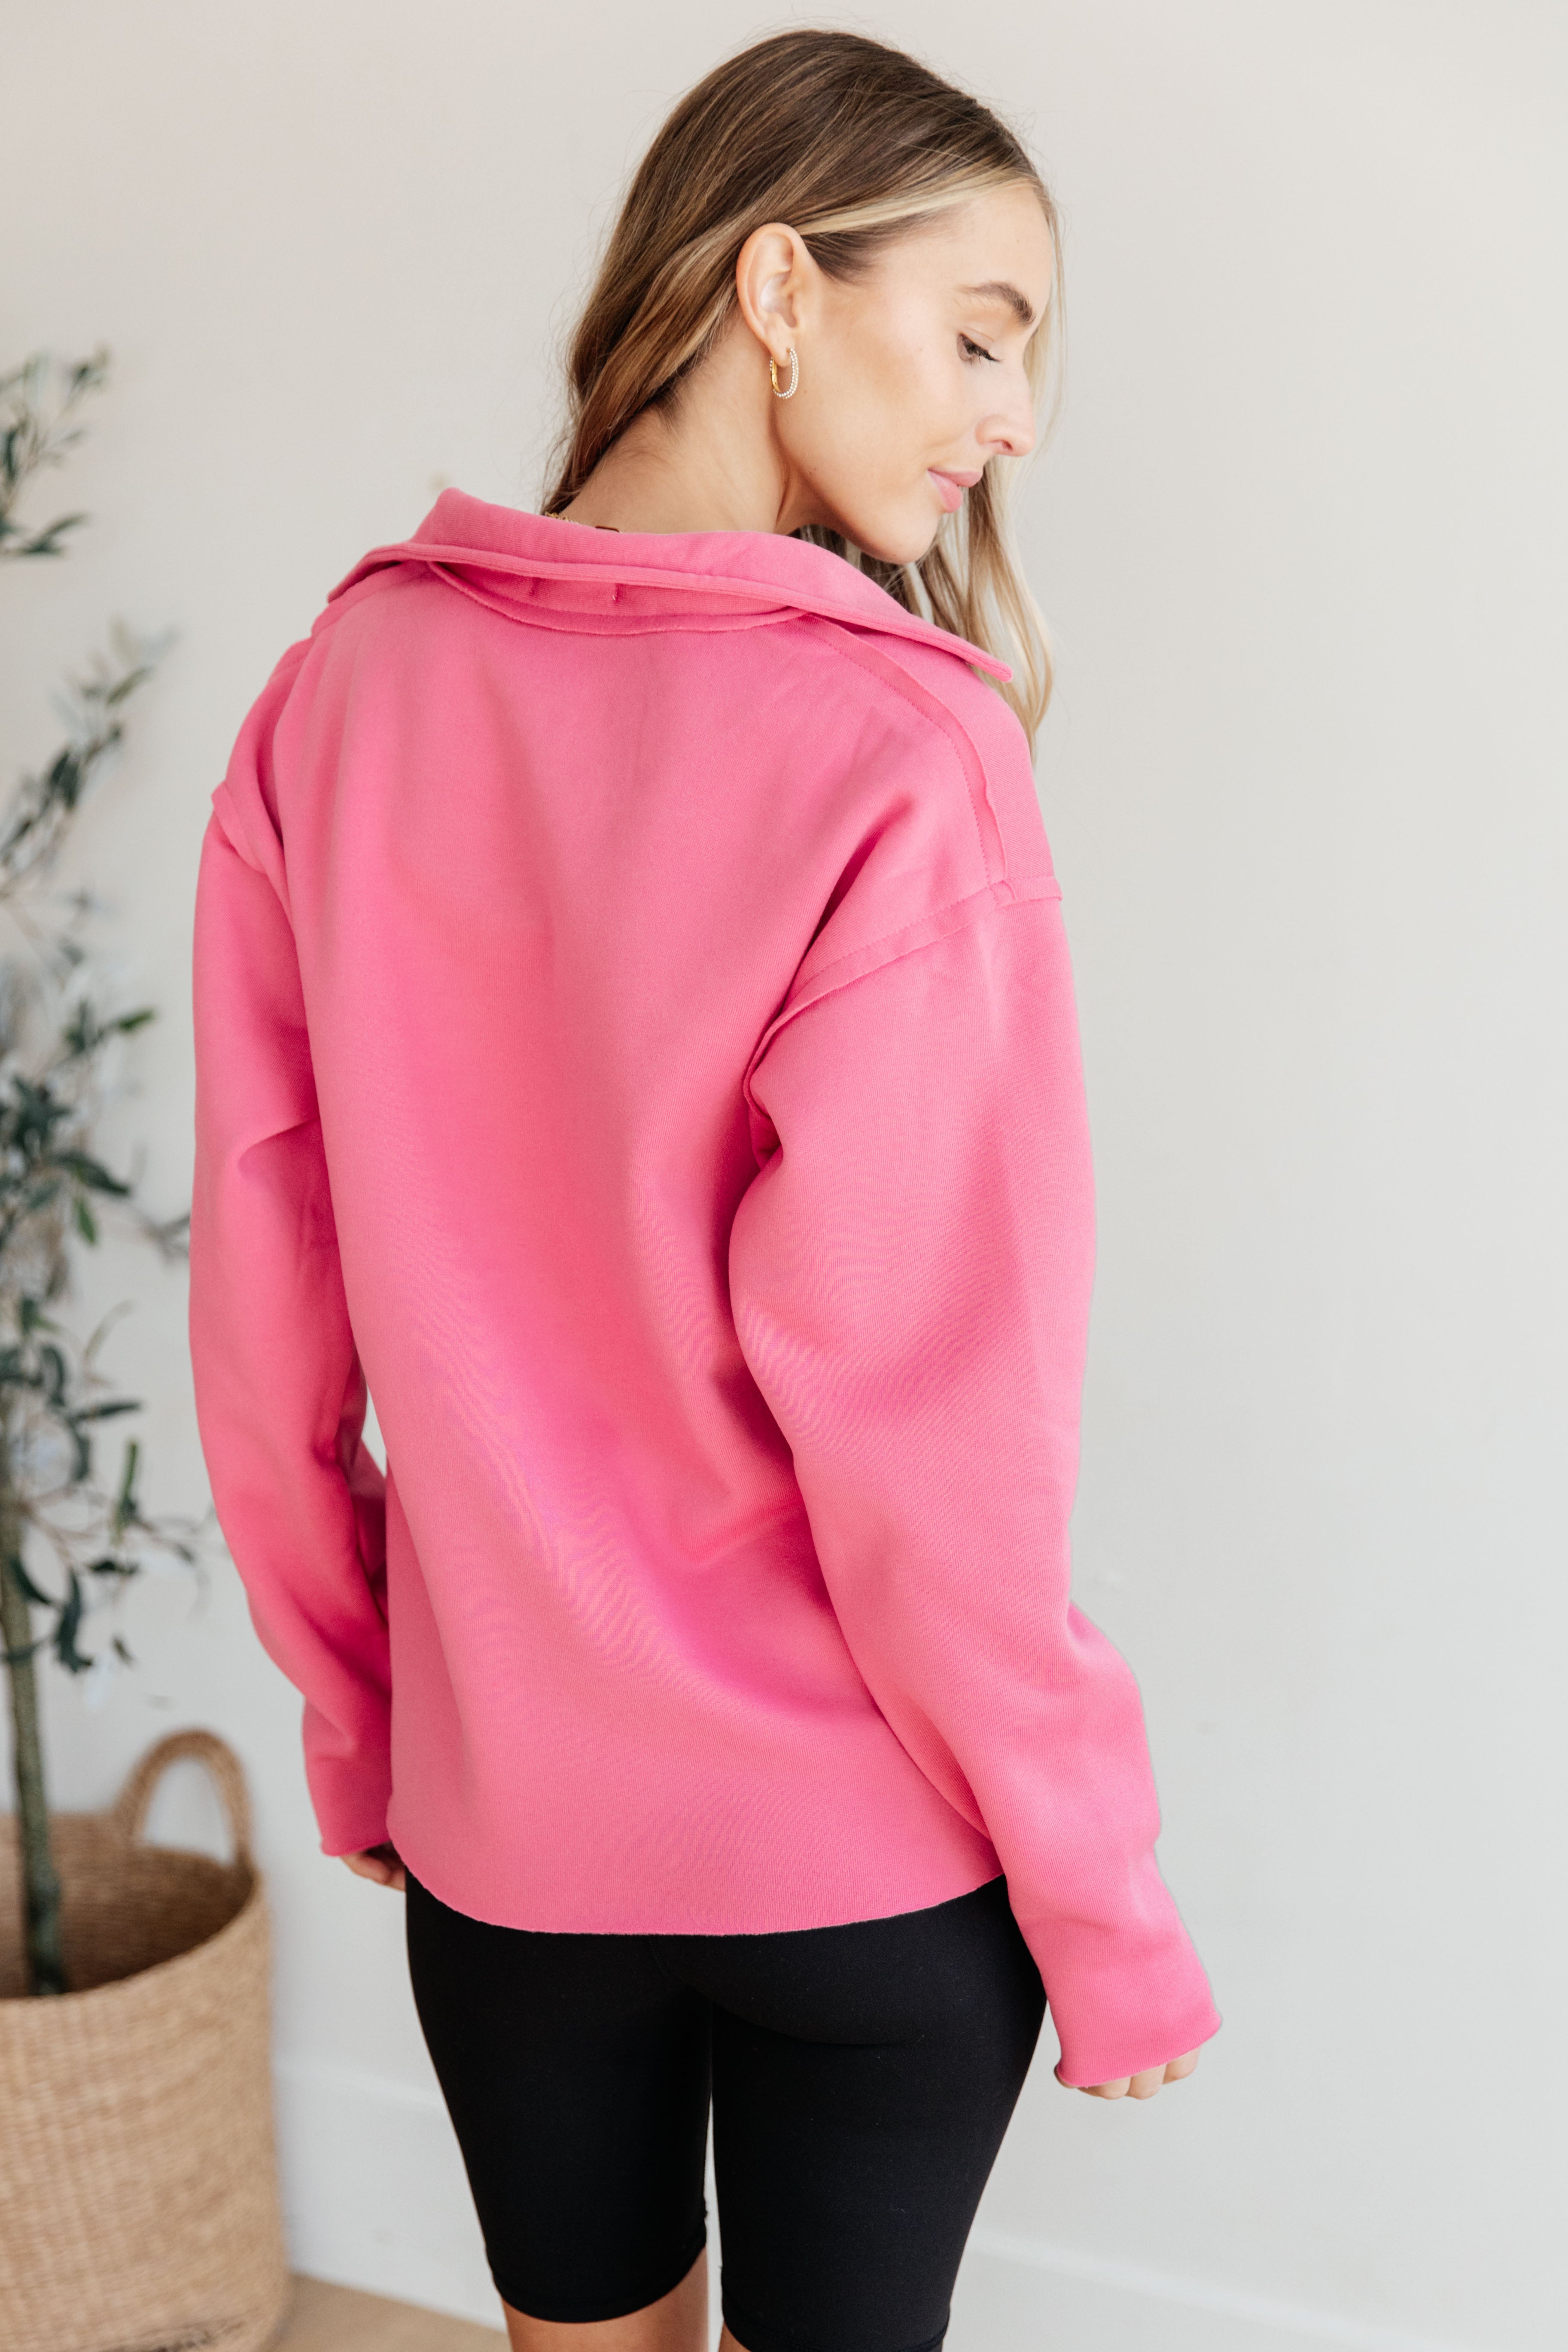 Same Ol' Situation Collared Pullover • Hot Pink